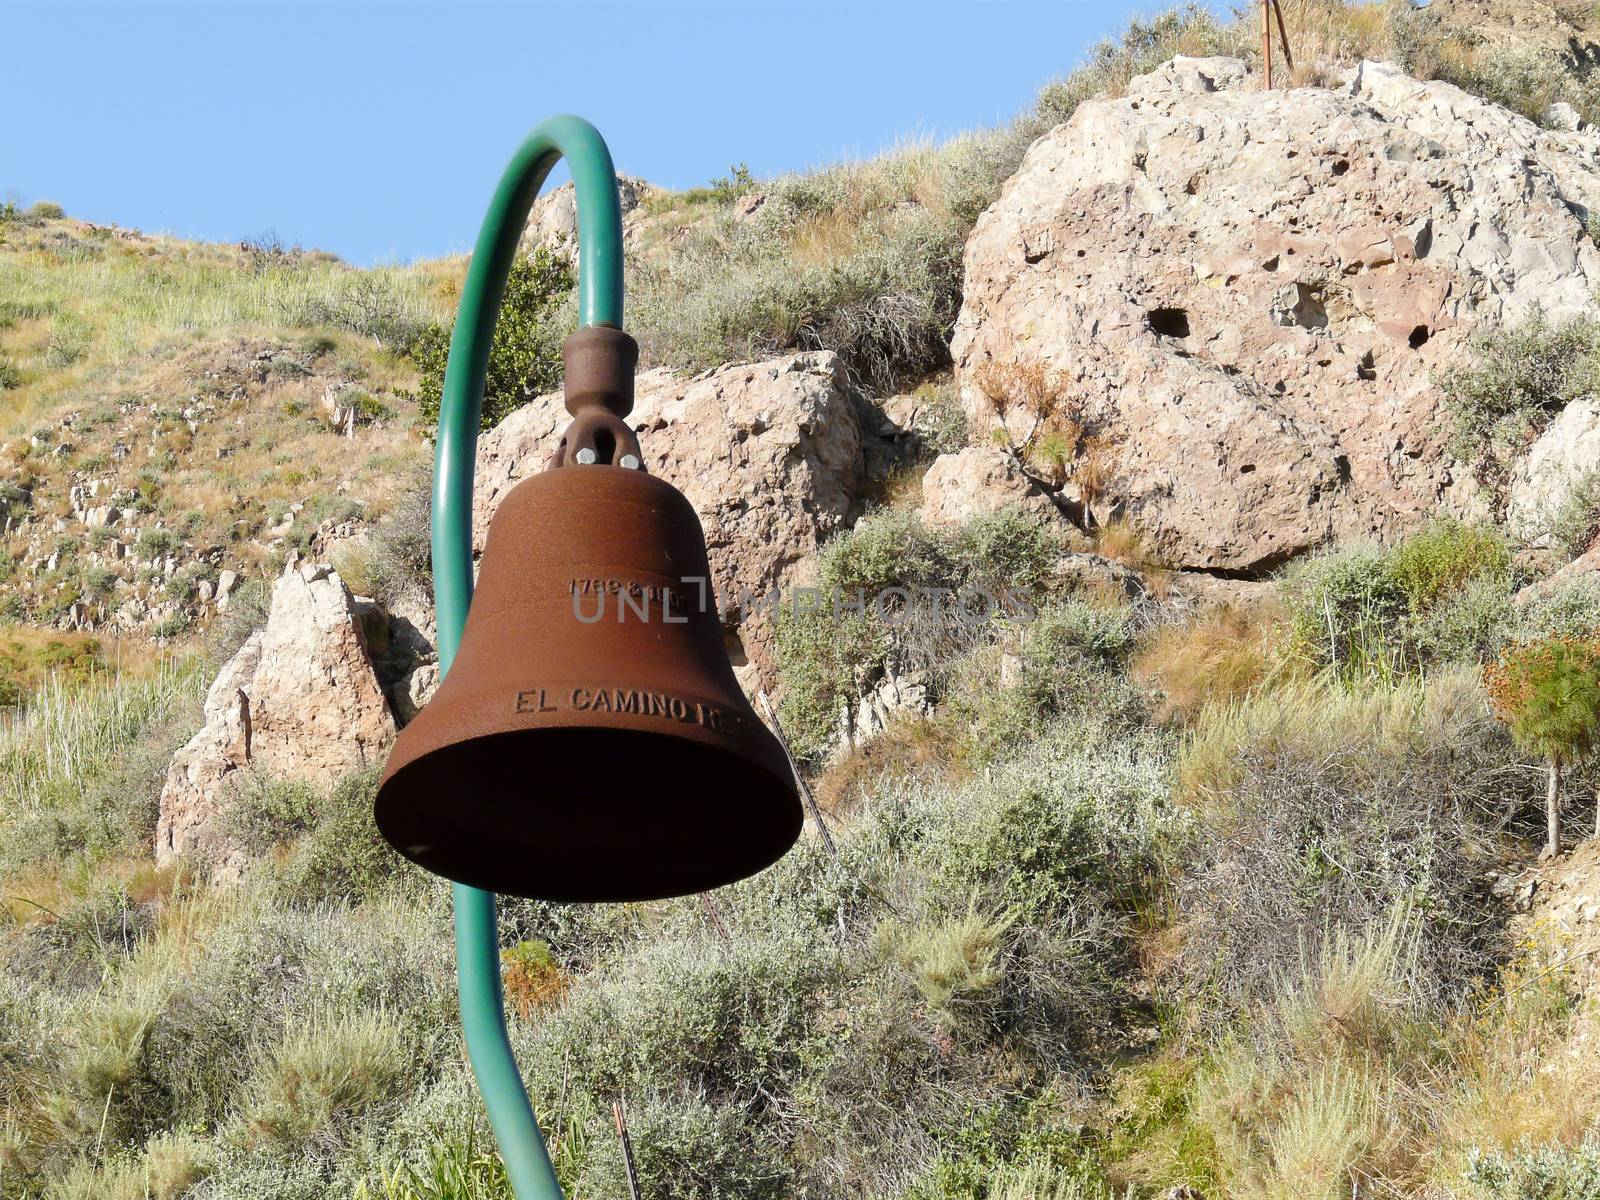 Bell at a side of the Royal Road in California